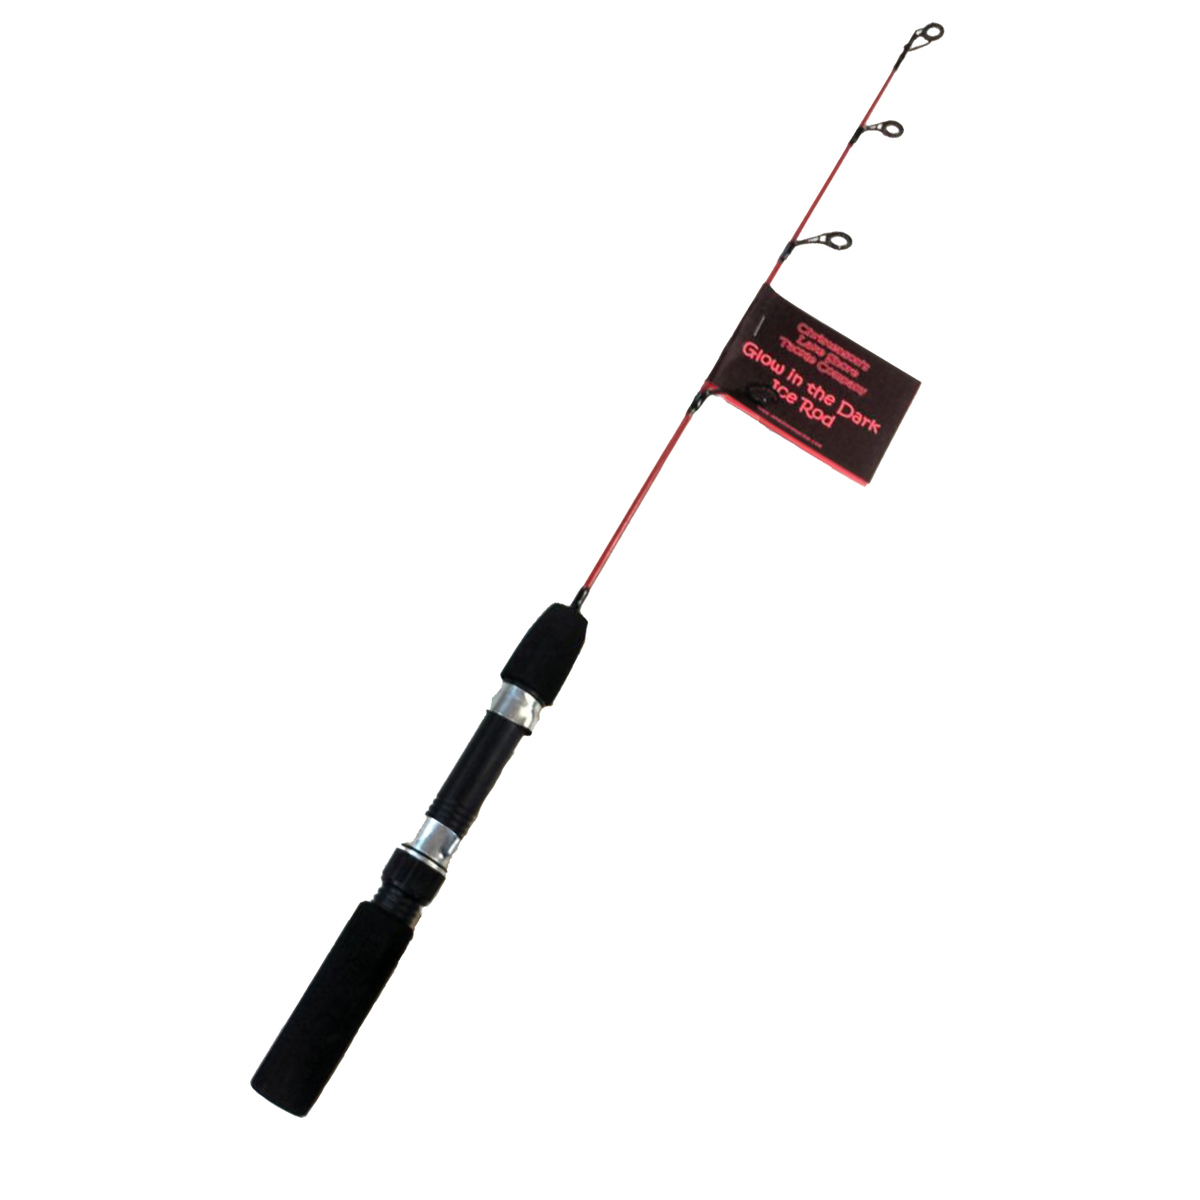 Lakeshore Tackle Glow Ice Fishing Spinning Rod - Red by Sportsman's Warehouse